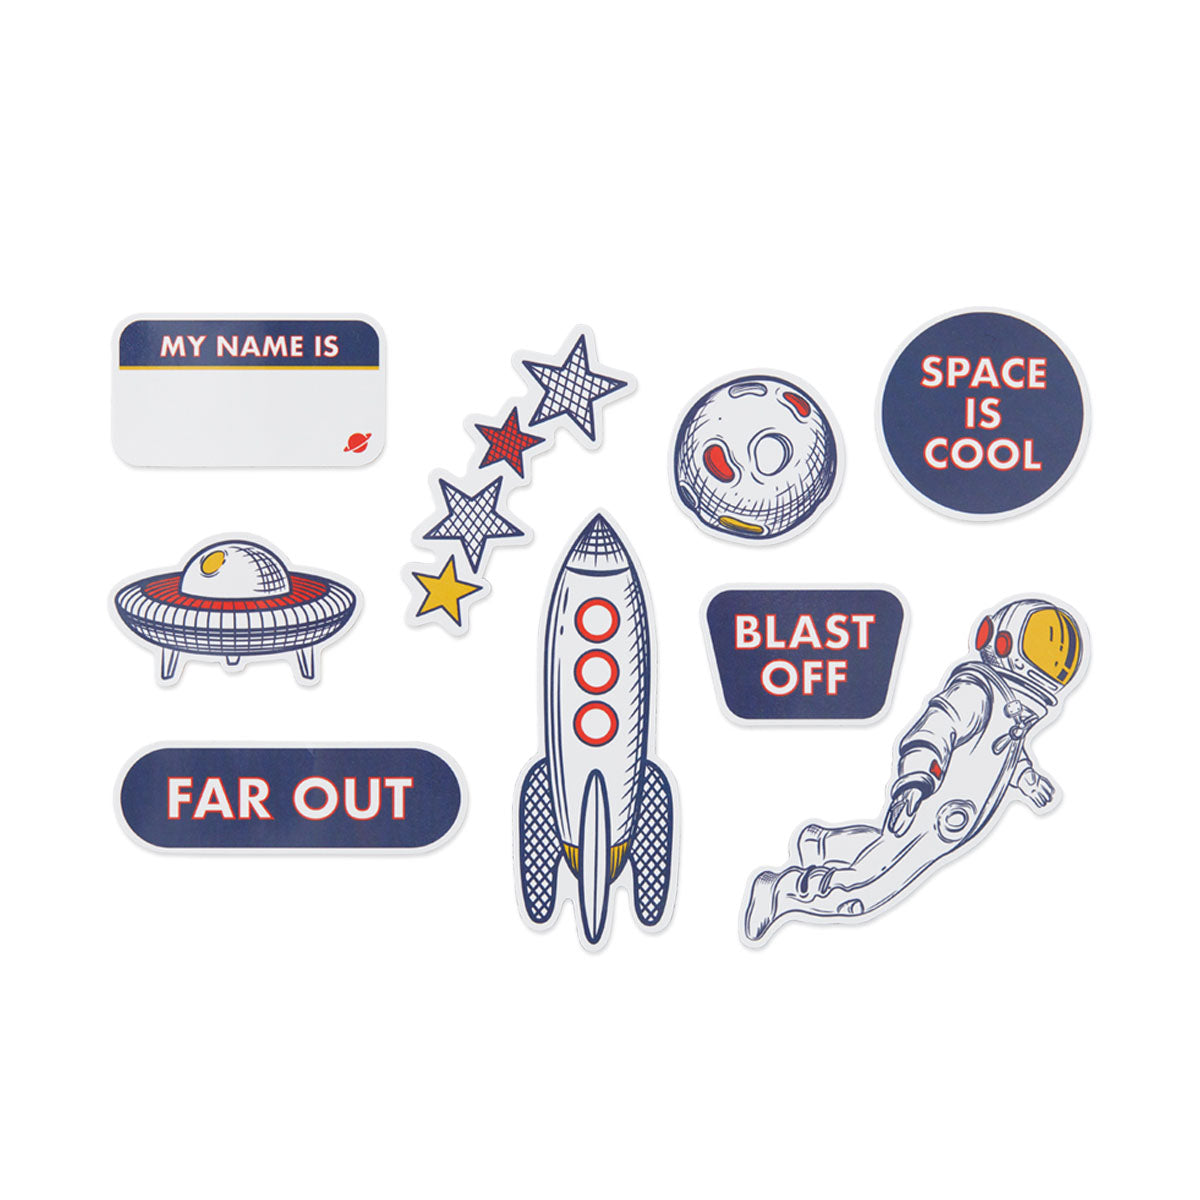 PlanetBox Mix & Match Magnets: Far Out Magnets by PlanetBox | Cute Kid Stuff